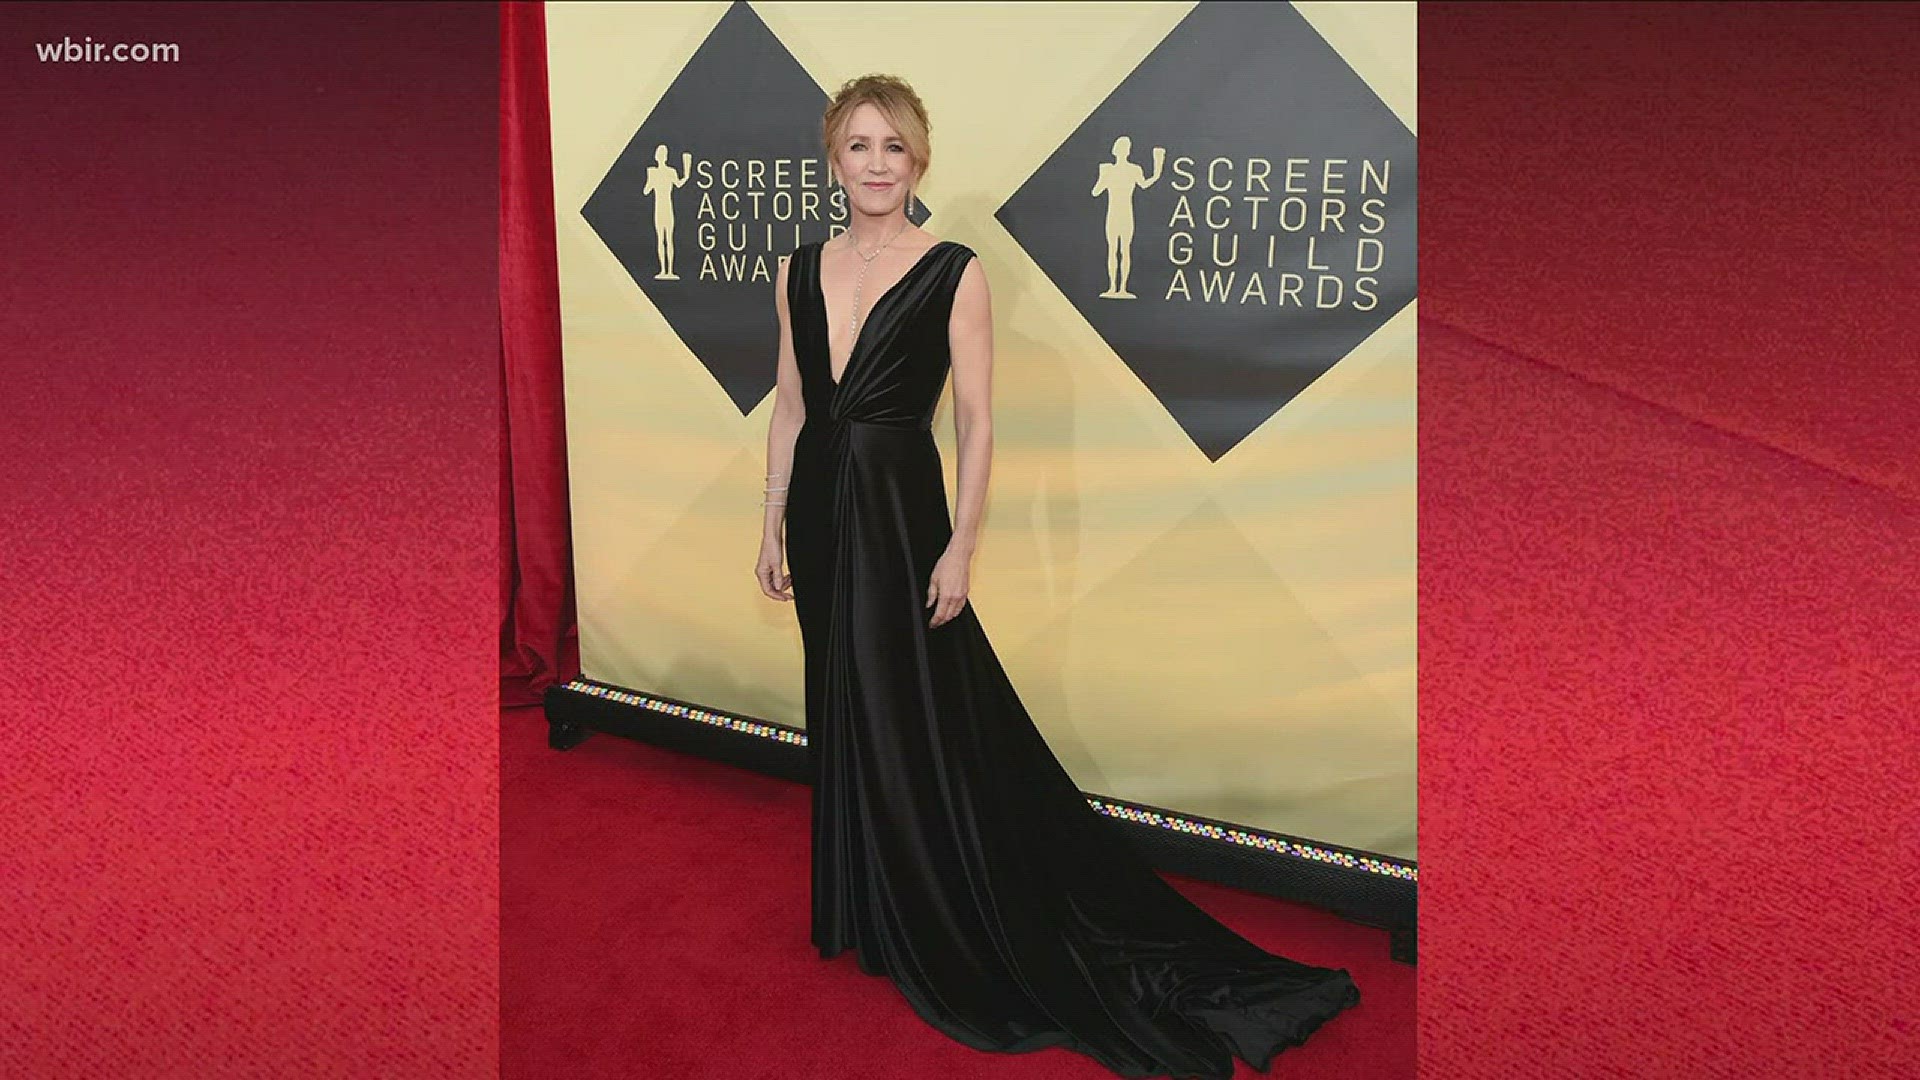 Abby Ham and Rebecca Franklin review the best dressed from the SAG Awards Red Carpet